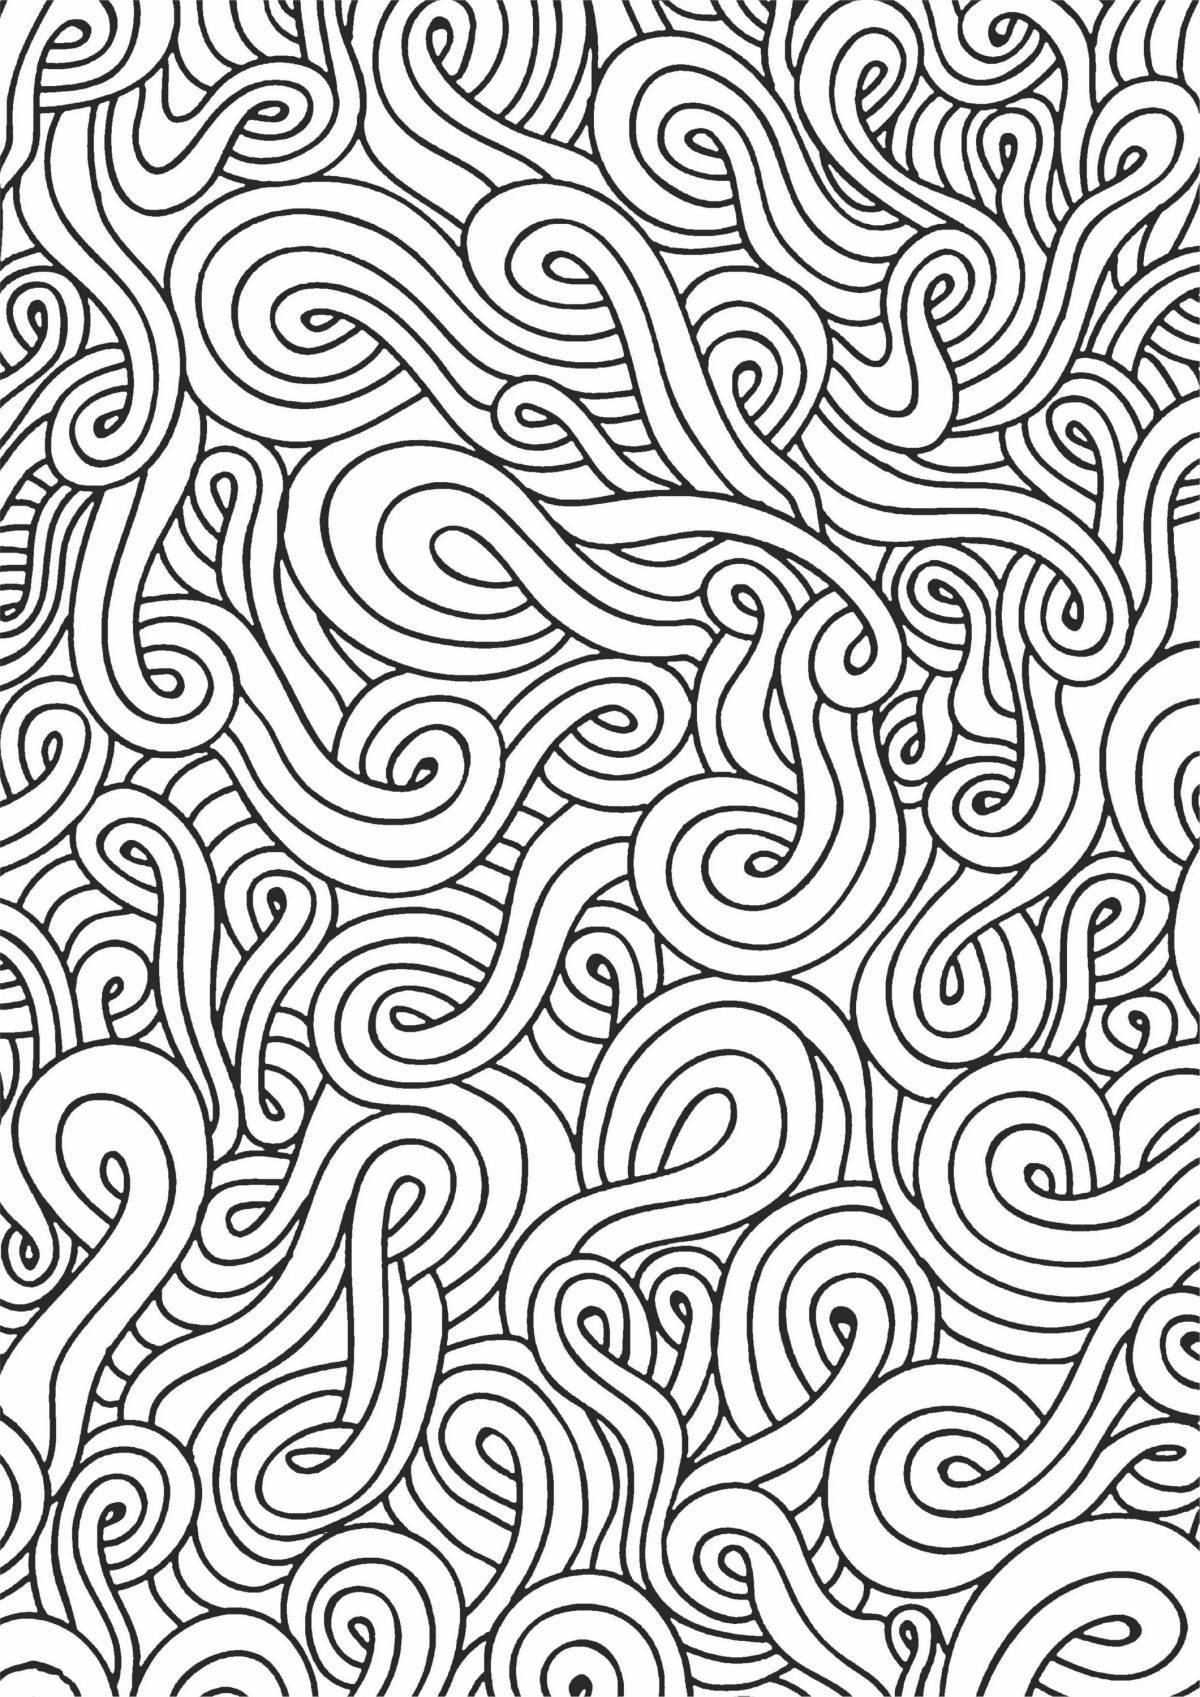 Refreshing striped anti-stress coloring book